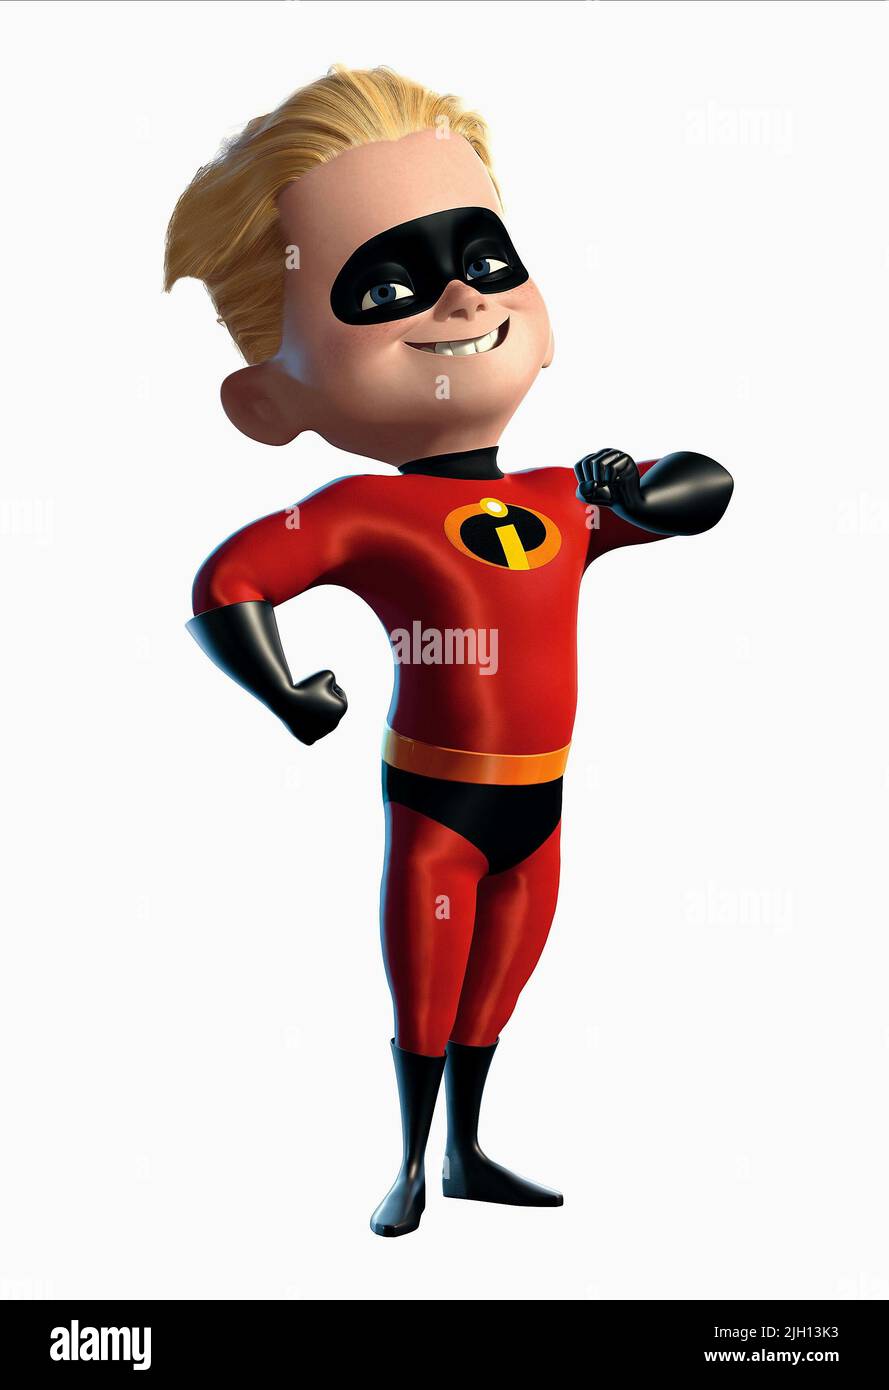 THE INCREDIBLES [US 2004] CRAIG T. NELSON voices Bob Parr / Mr. Incredible  Date: 2004 Stock Photo - Alamy